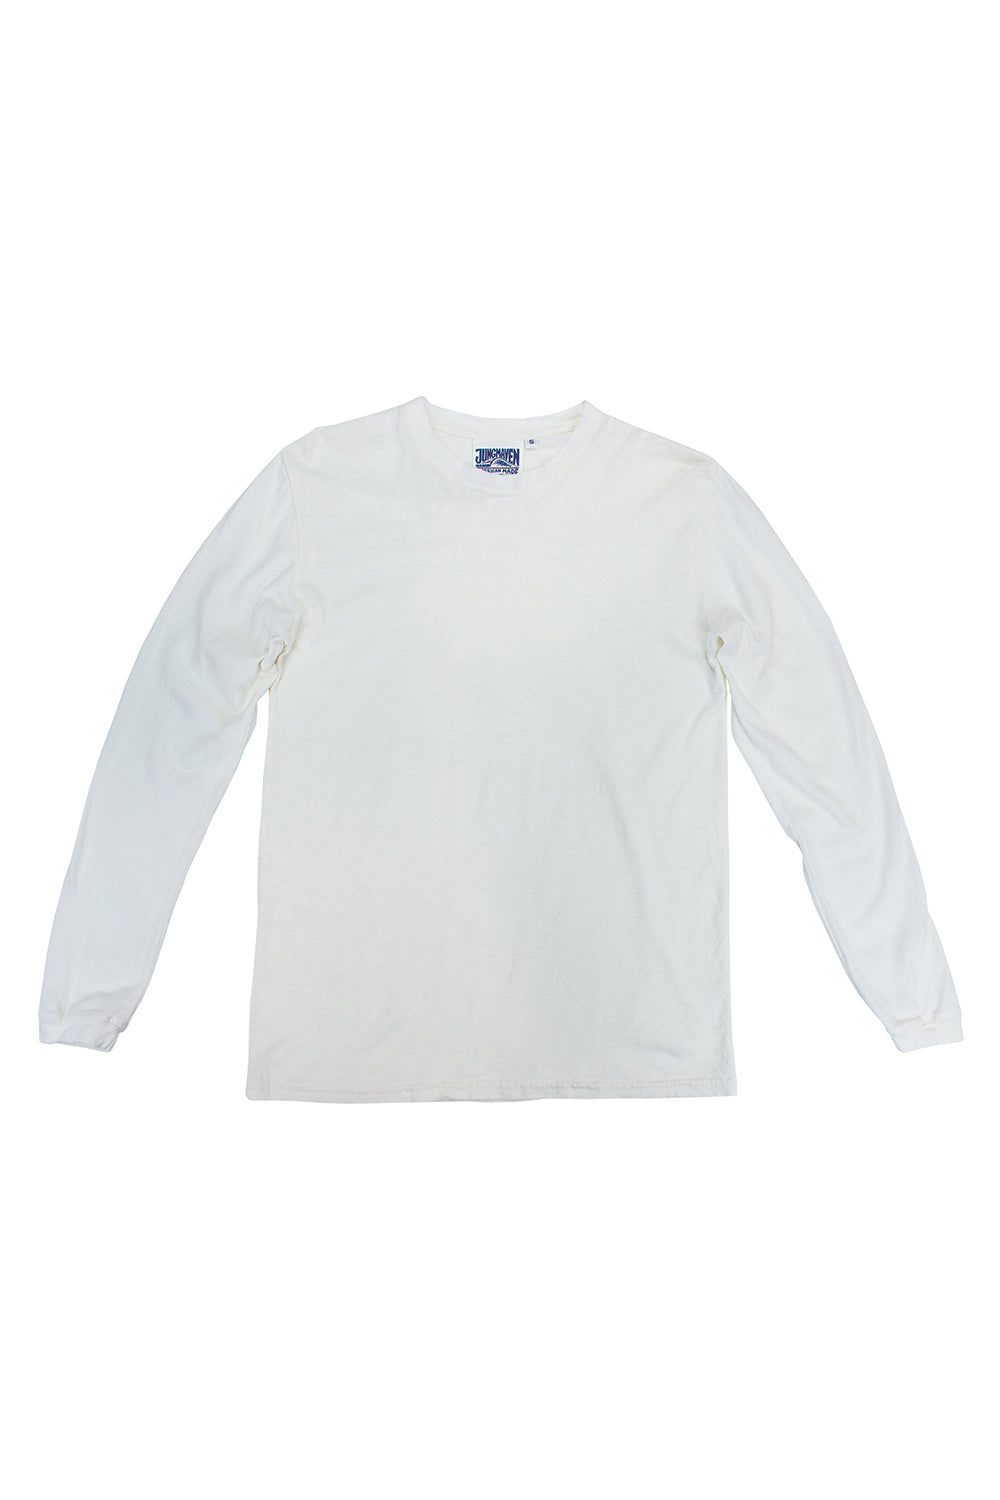 Jung Long Sleeve Tee | Jungmaven Hemp Clothing & Accessories Washed White / XS